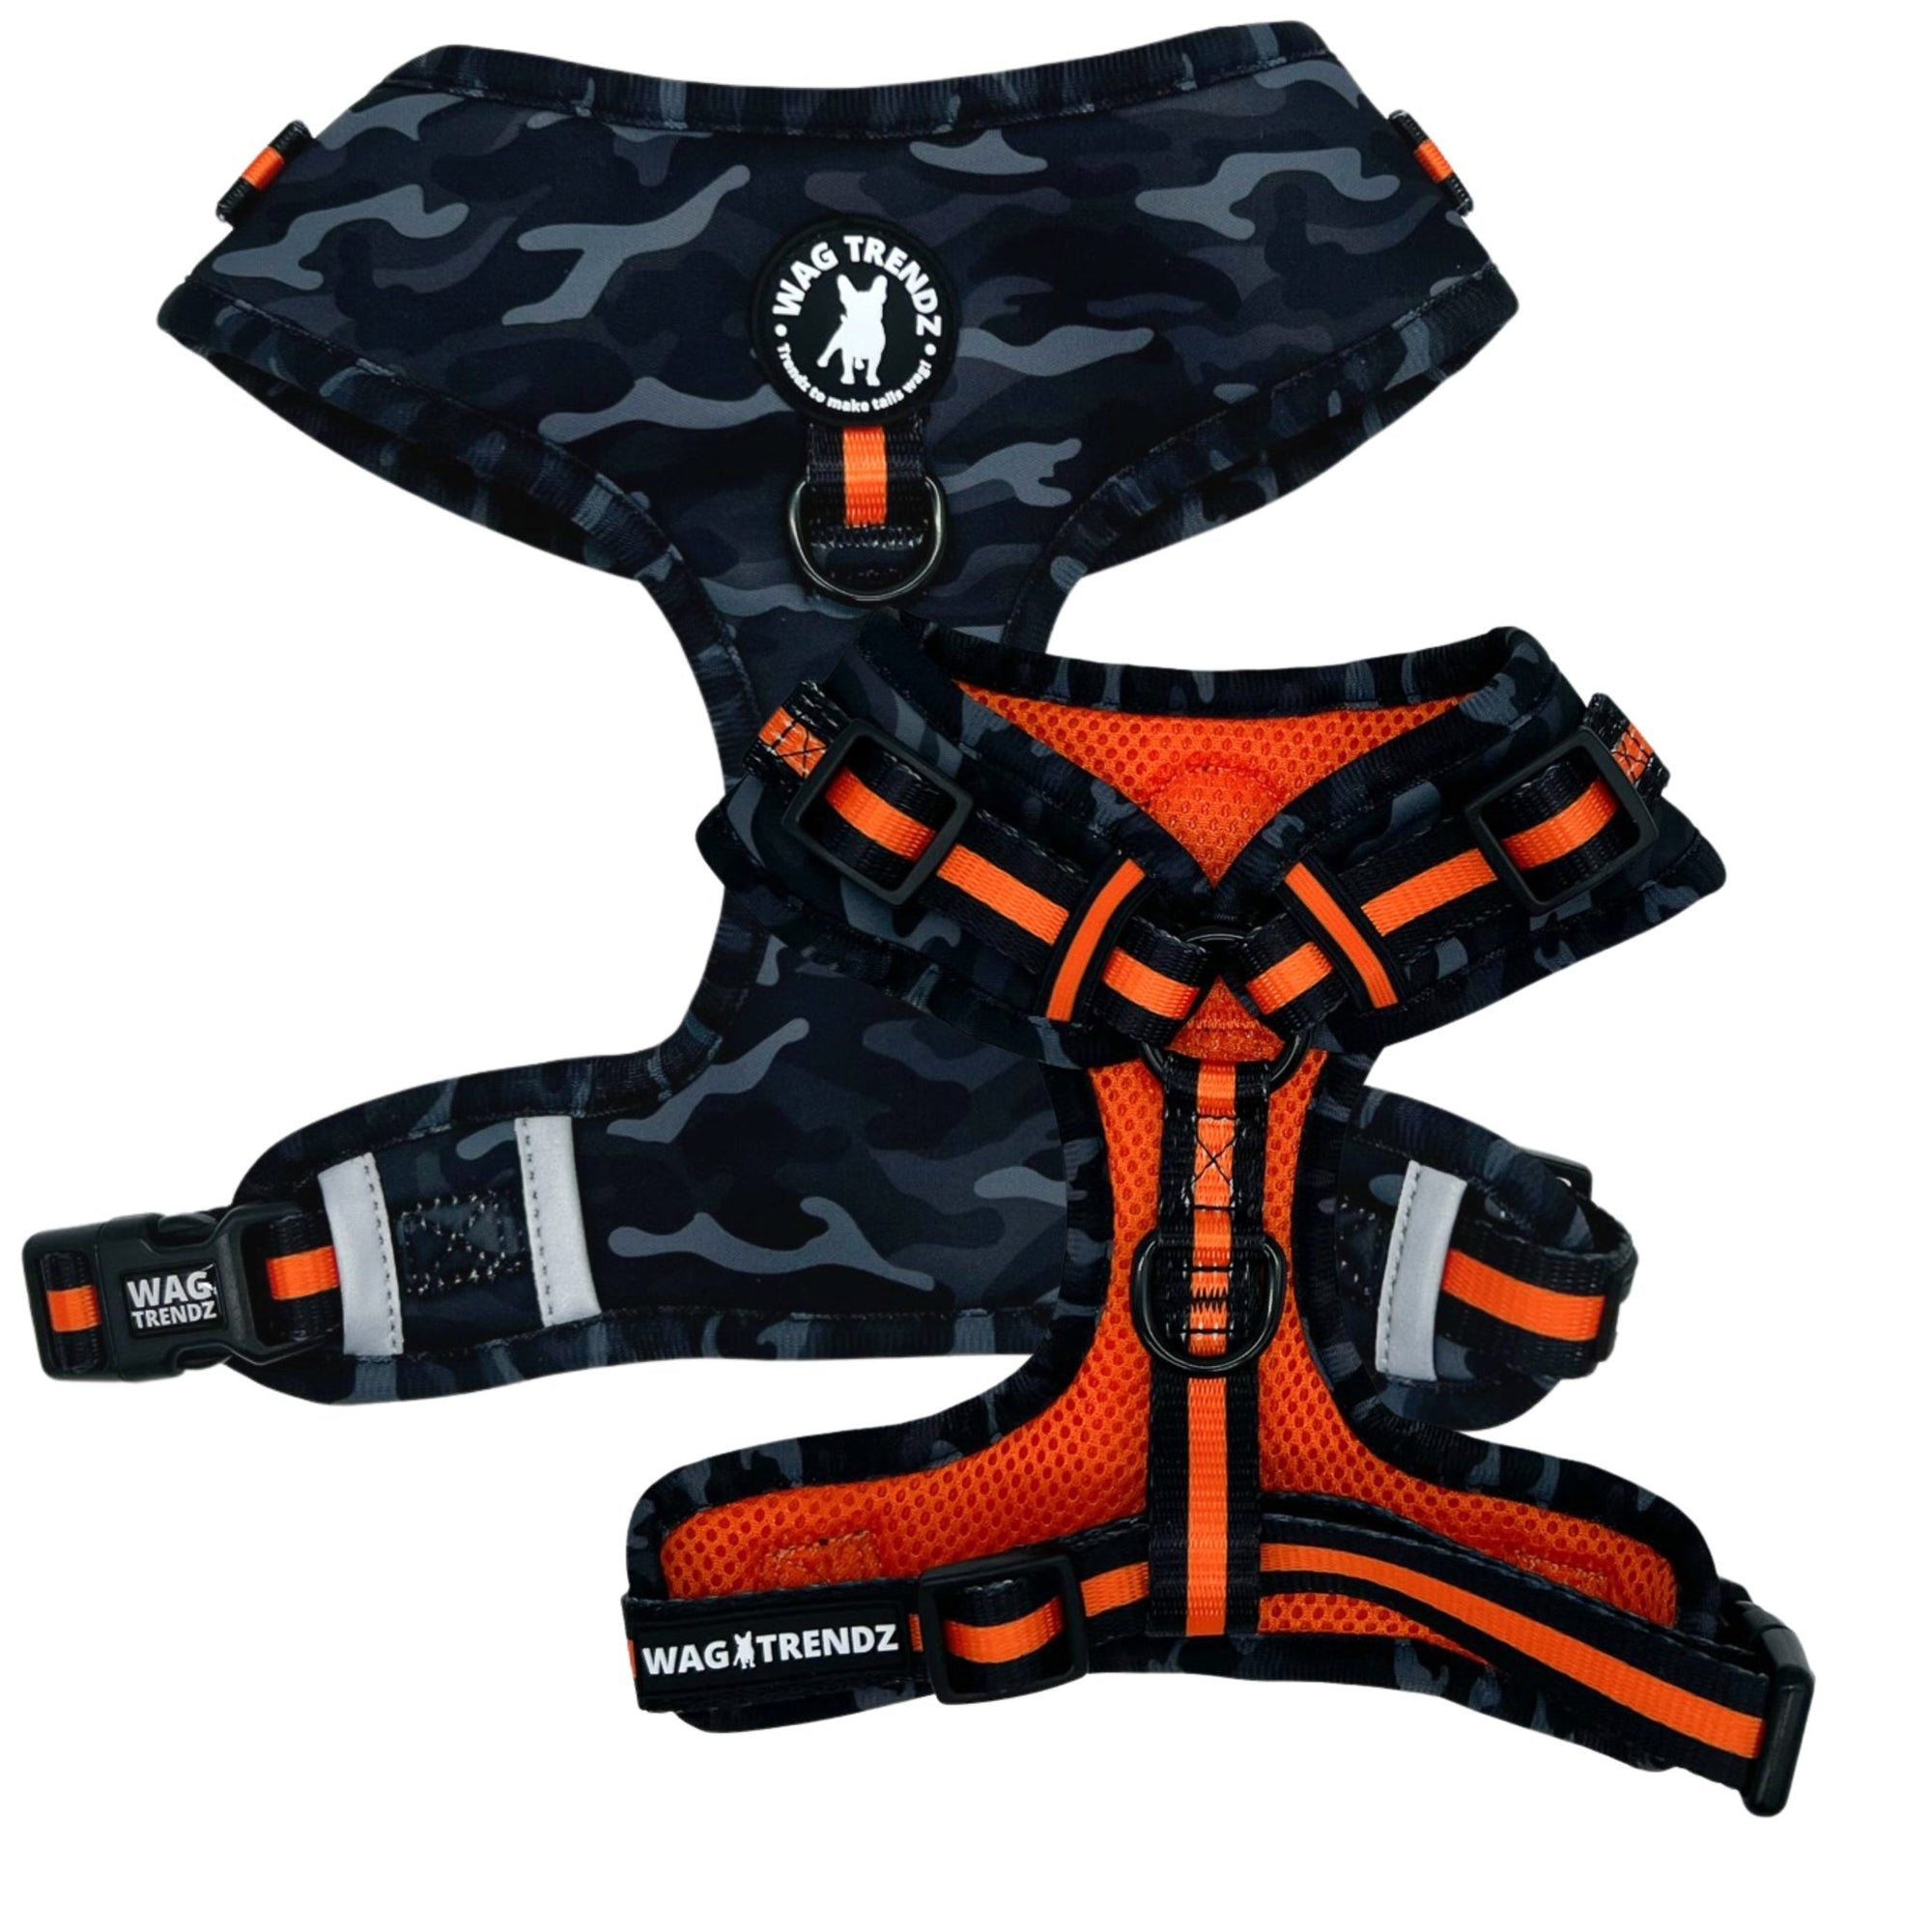 No Pull Dog Harness - black and gray camo dog adjustable harness with front clip and orange accents - front & back view - Wag Trendz